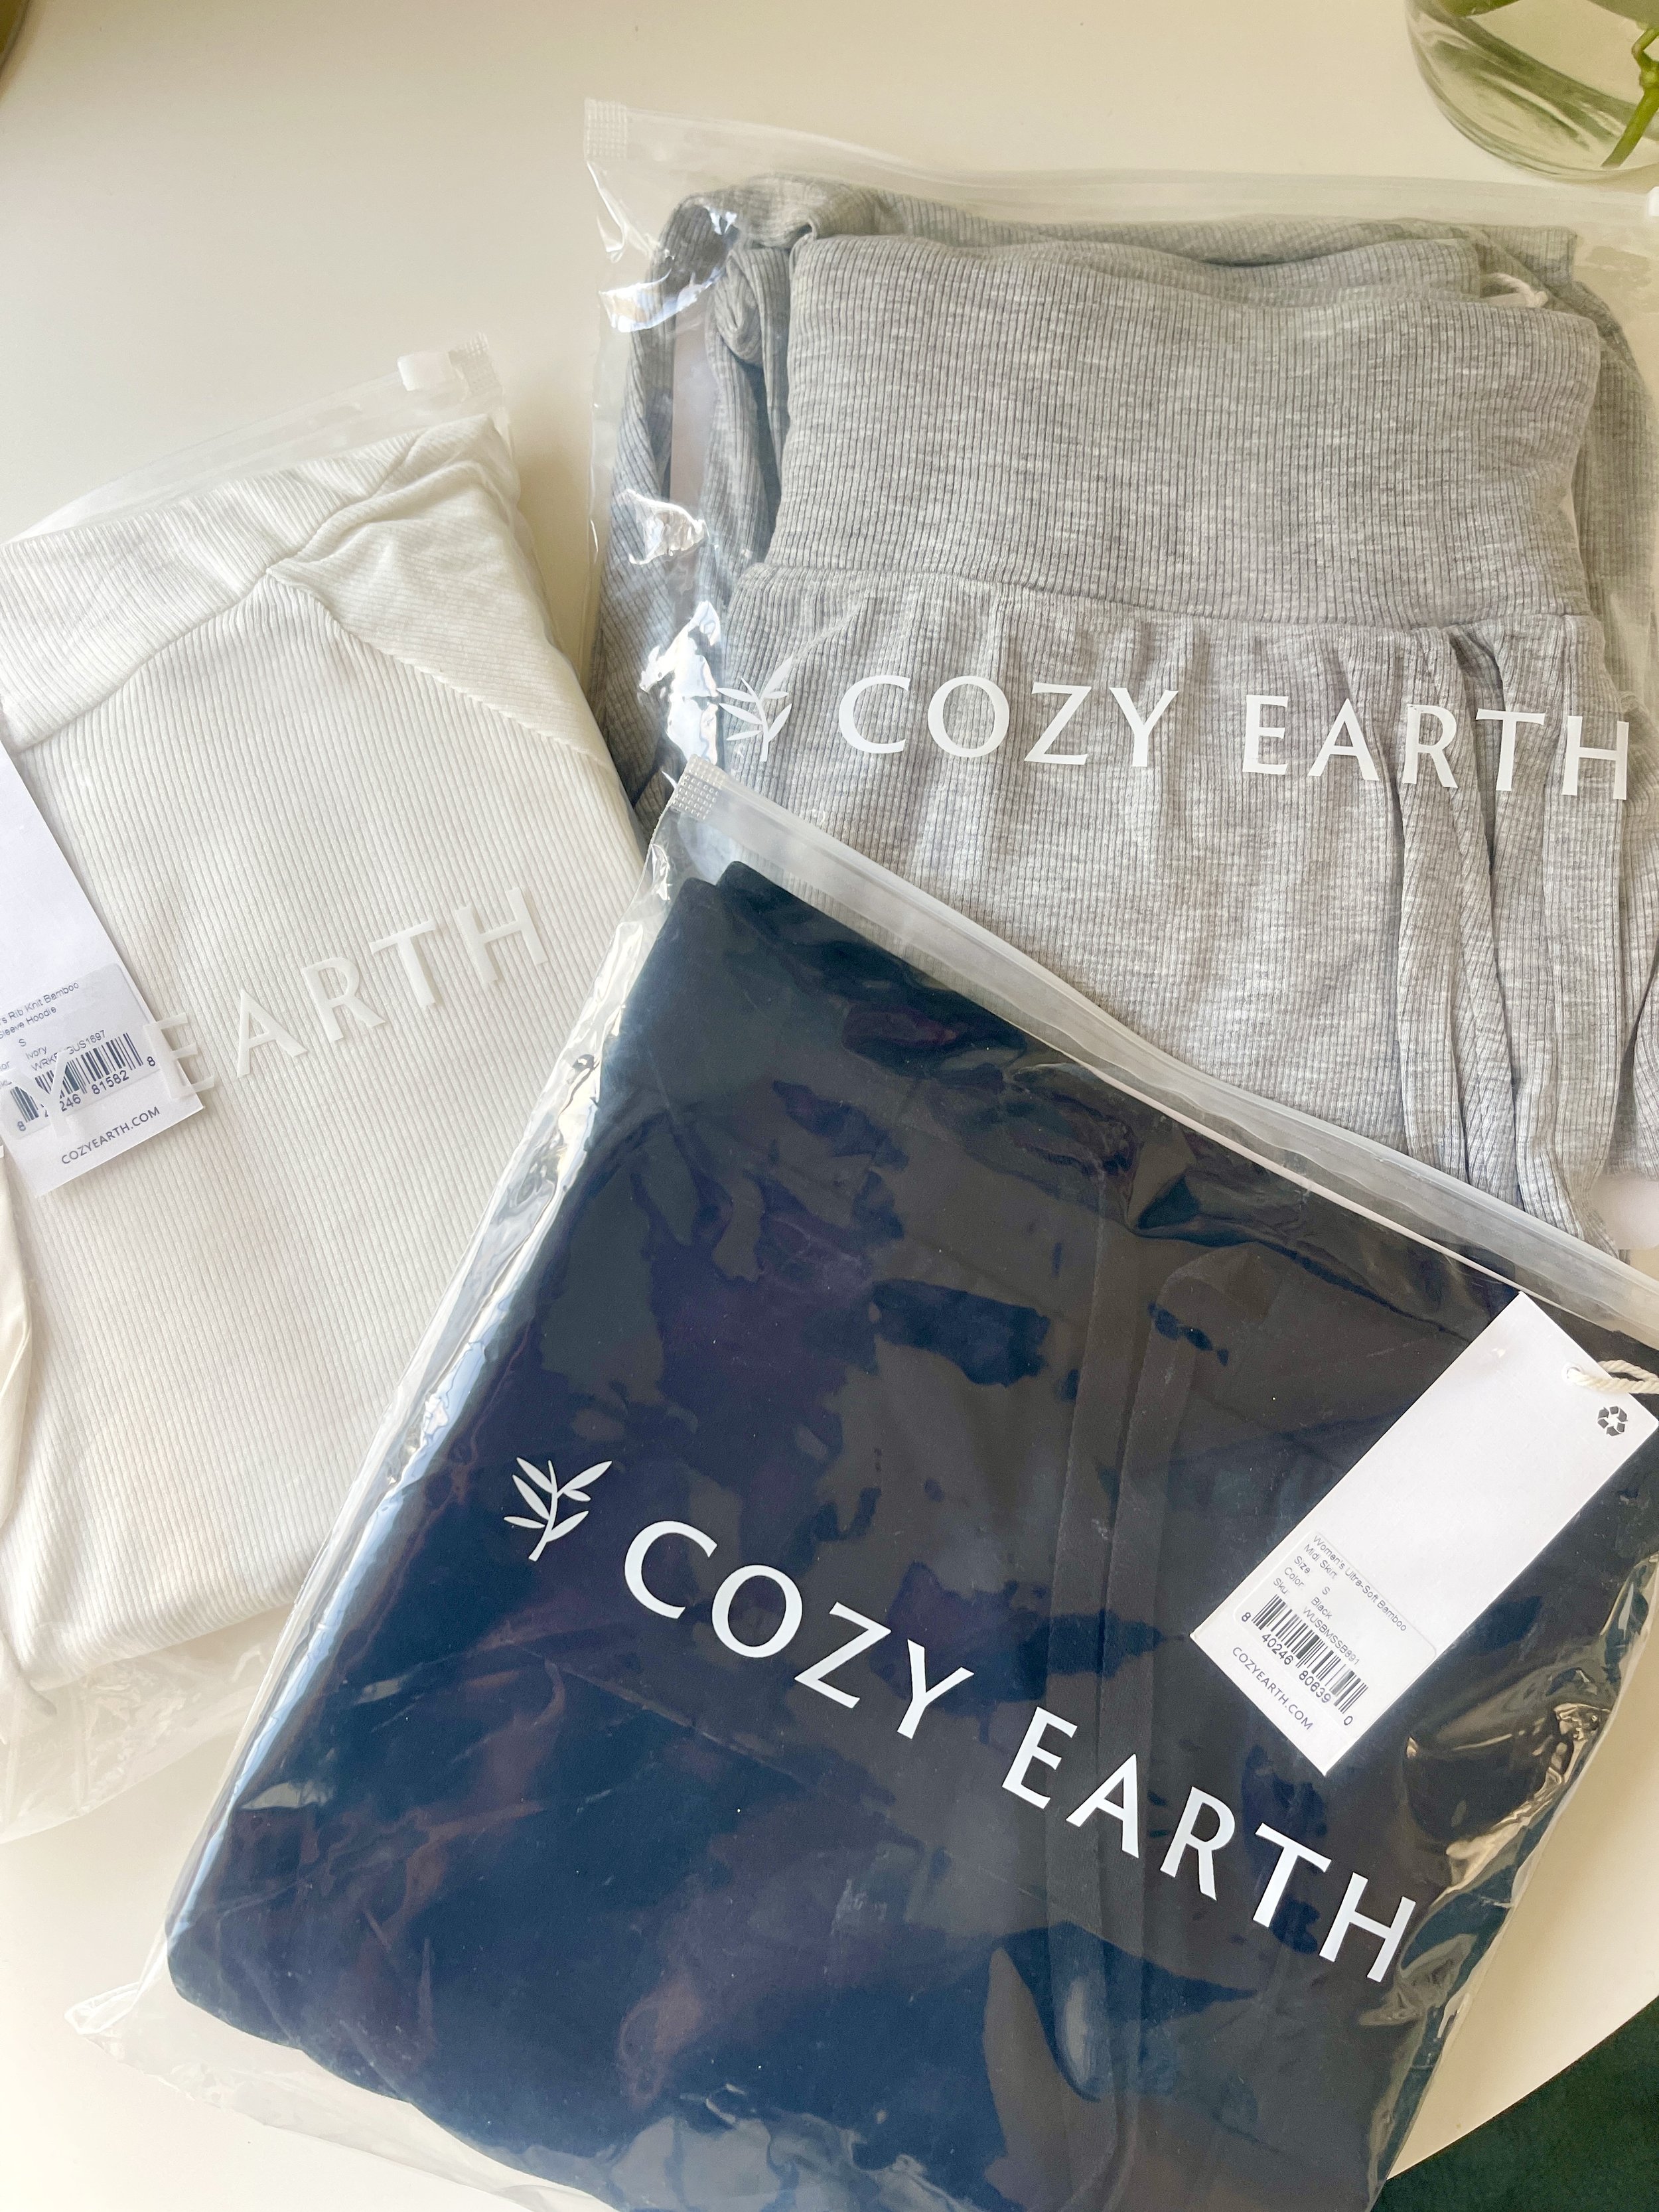 If you are looking for Cozy Earth Joggers Reviews or the best bamboo joggers, then you have come to the right place! In this blog post, you will find my honest Cozy Earth jogger reviews including the Cozy Earth bamboo joggers, the Cozy Earth